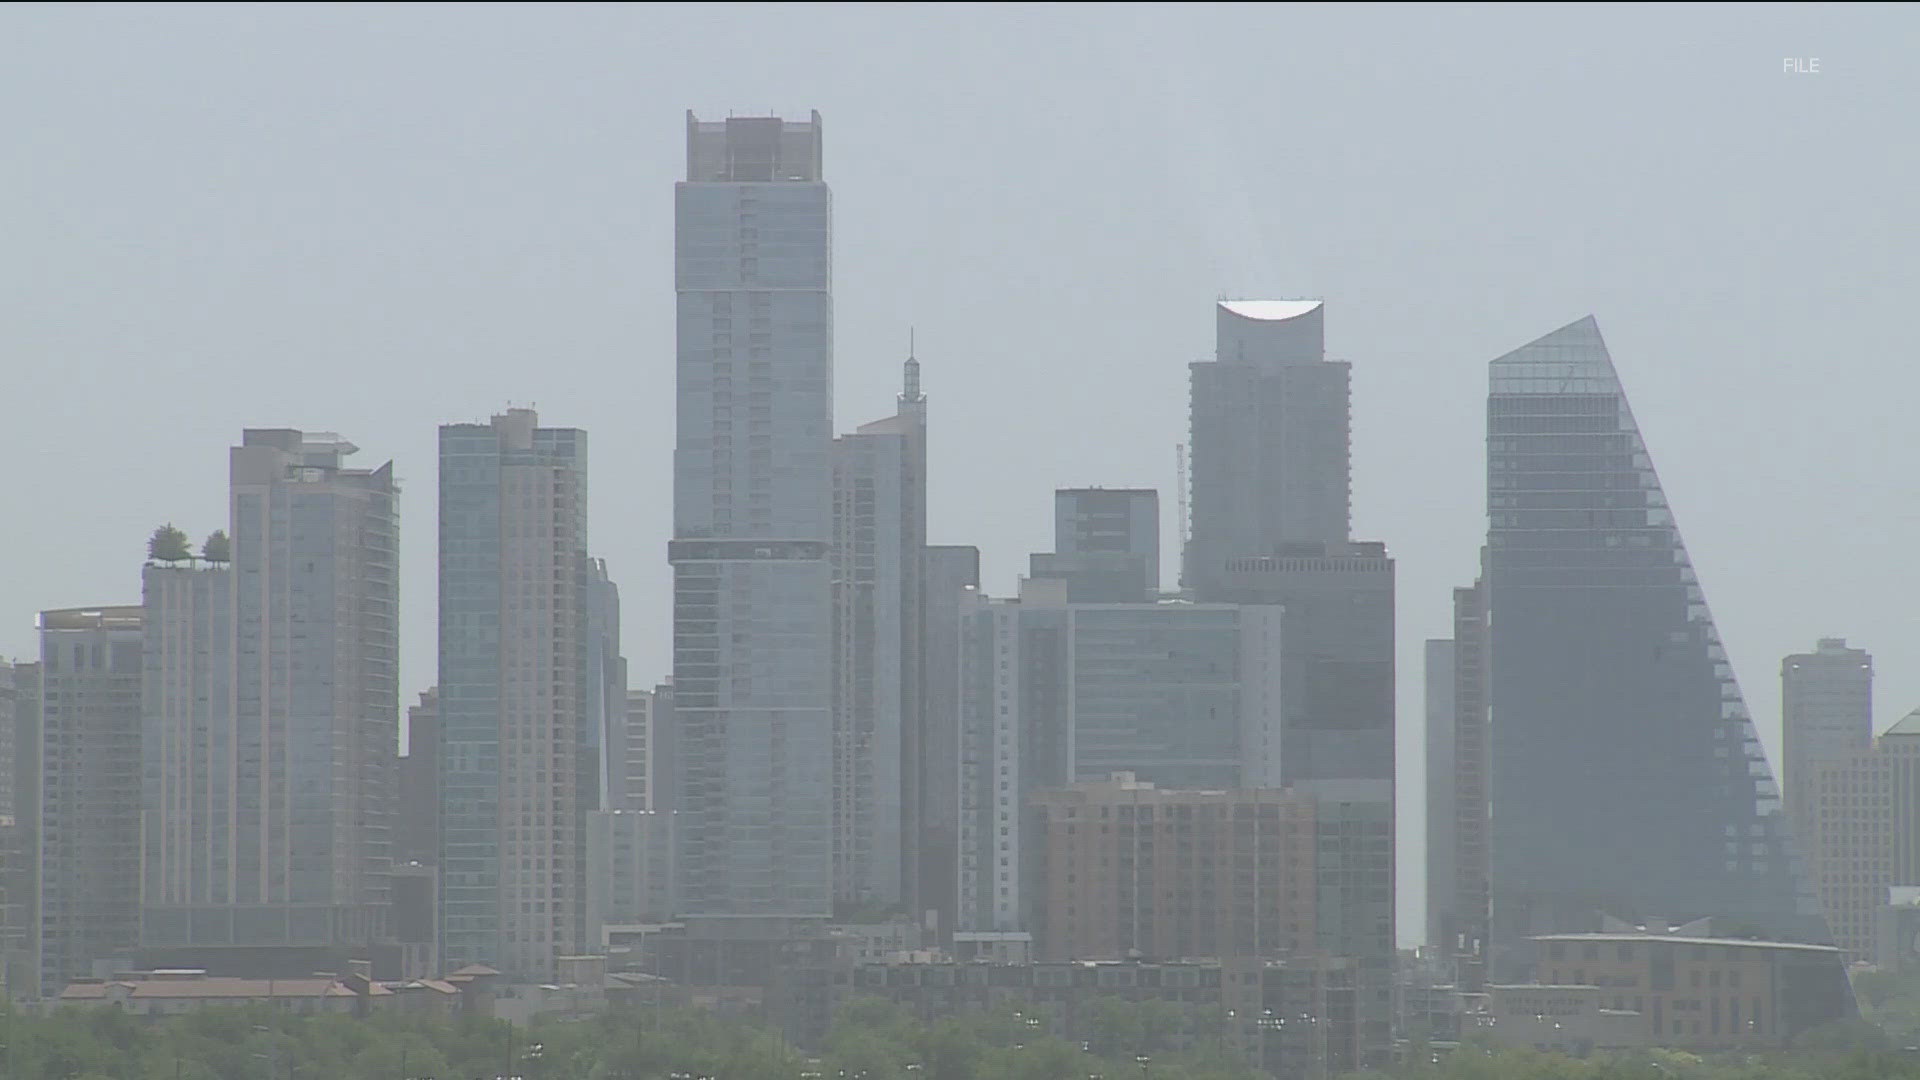 Has Central Texas' air quality gotten better or worse in recent years? KVUE spoke with Austin's Office of Sustainability to find out.